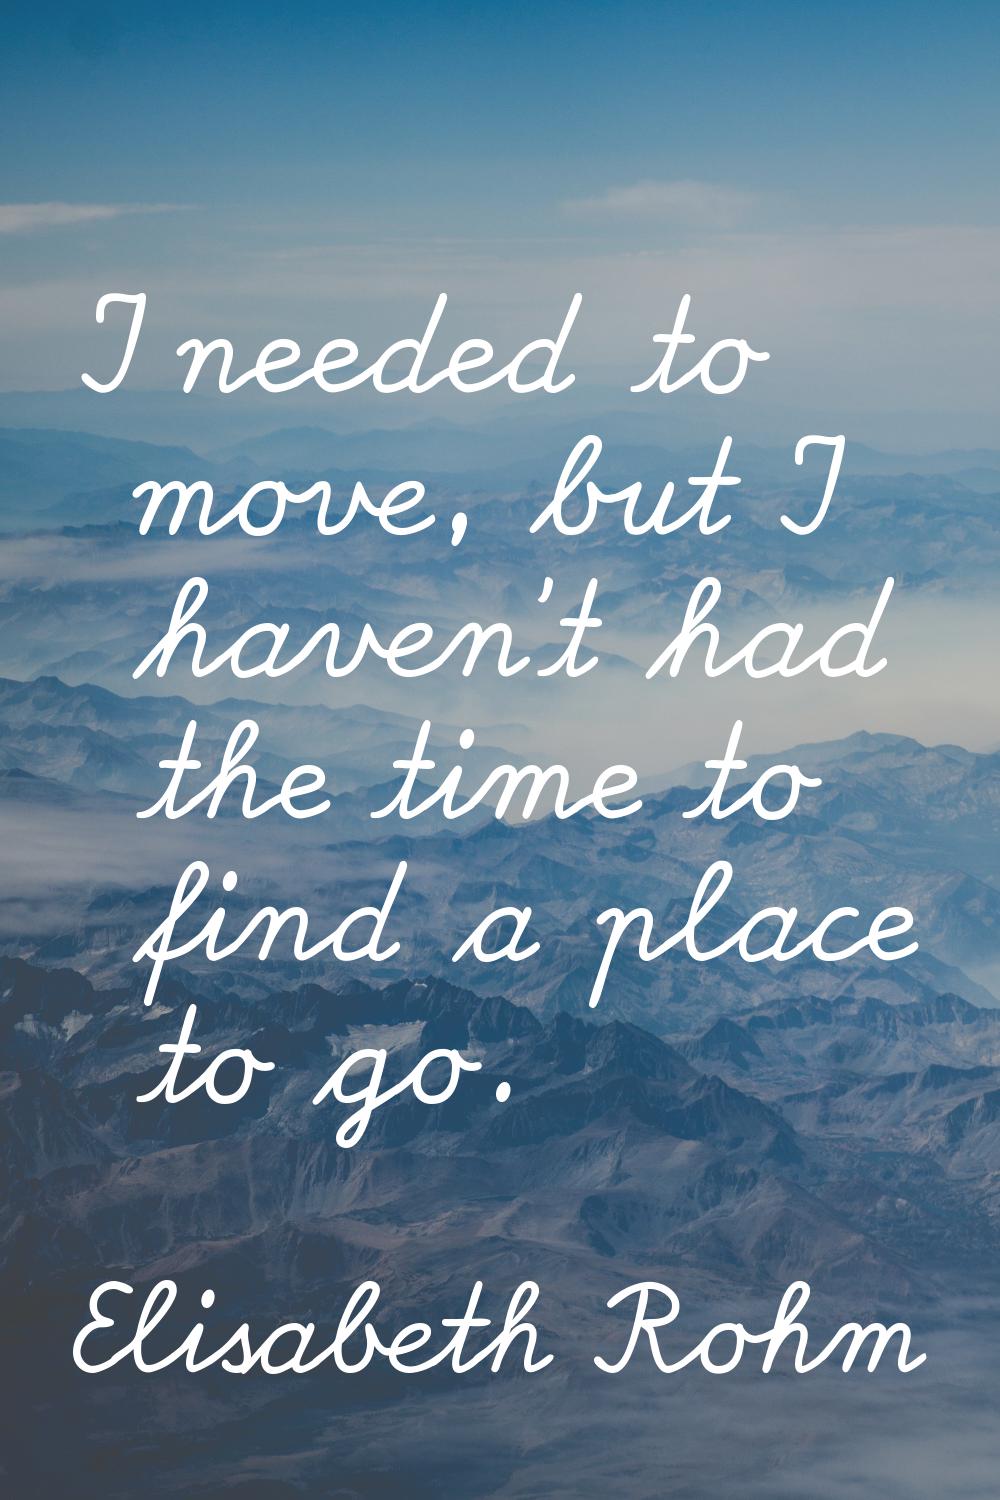 I needed to move, but I haven't had the time to find a place to go.